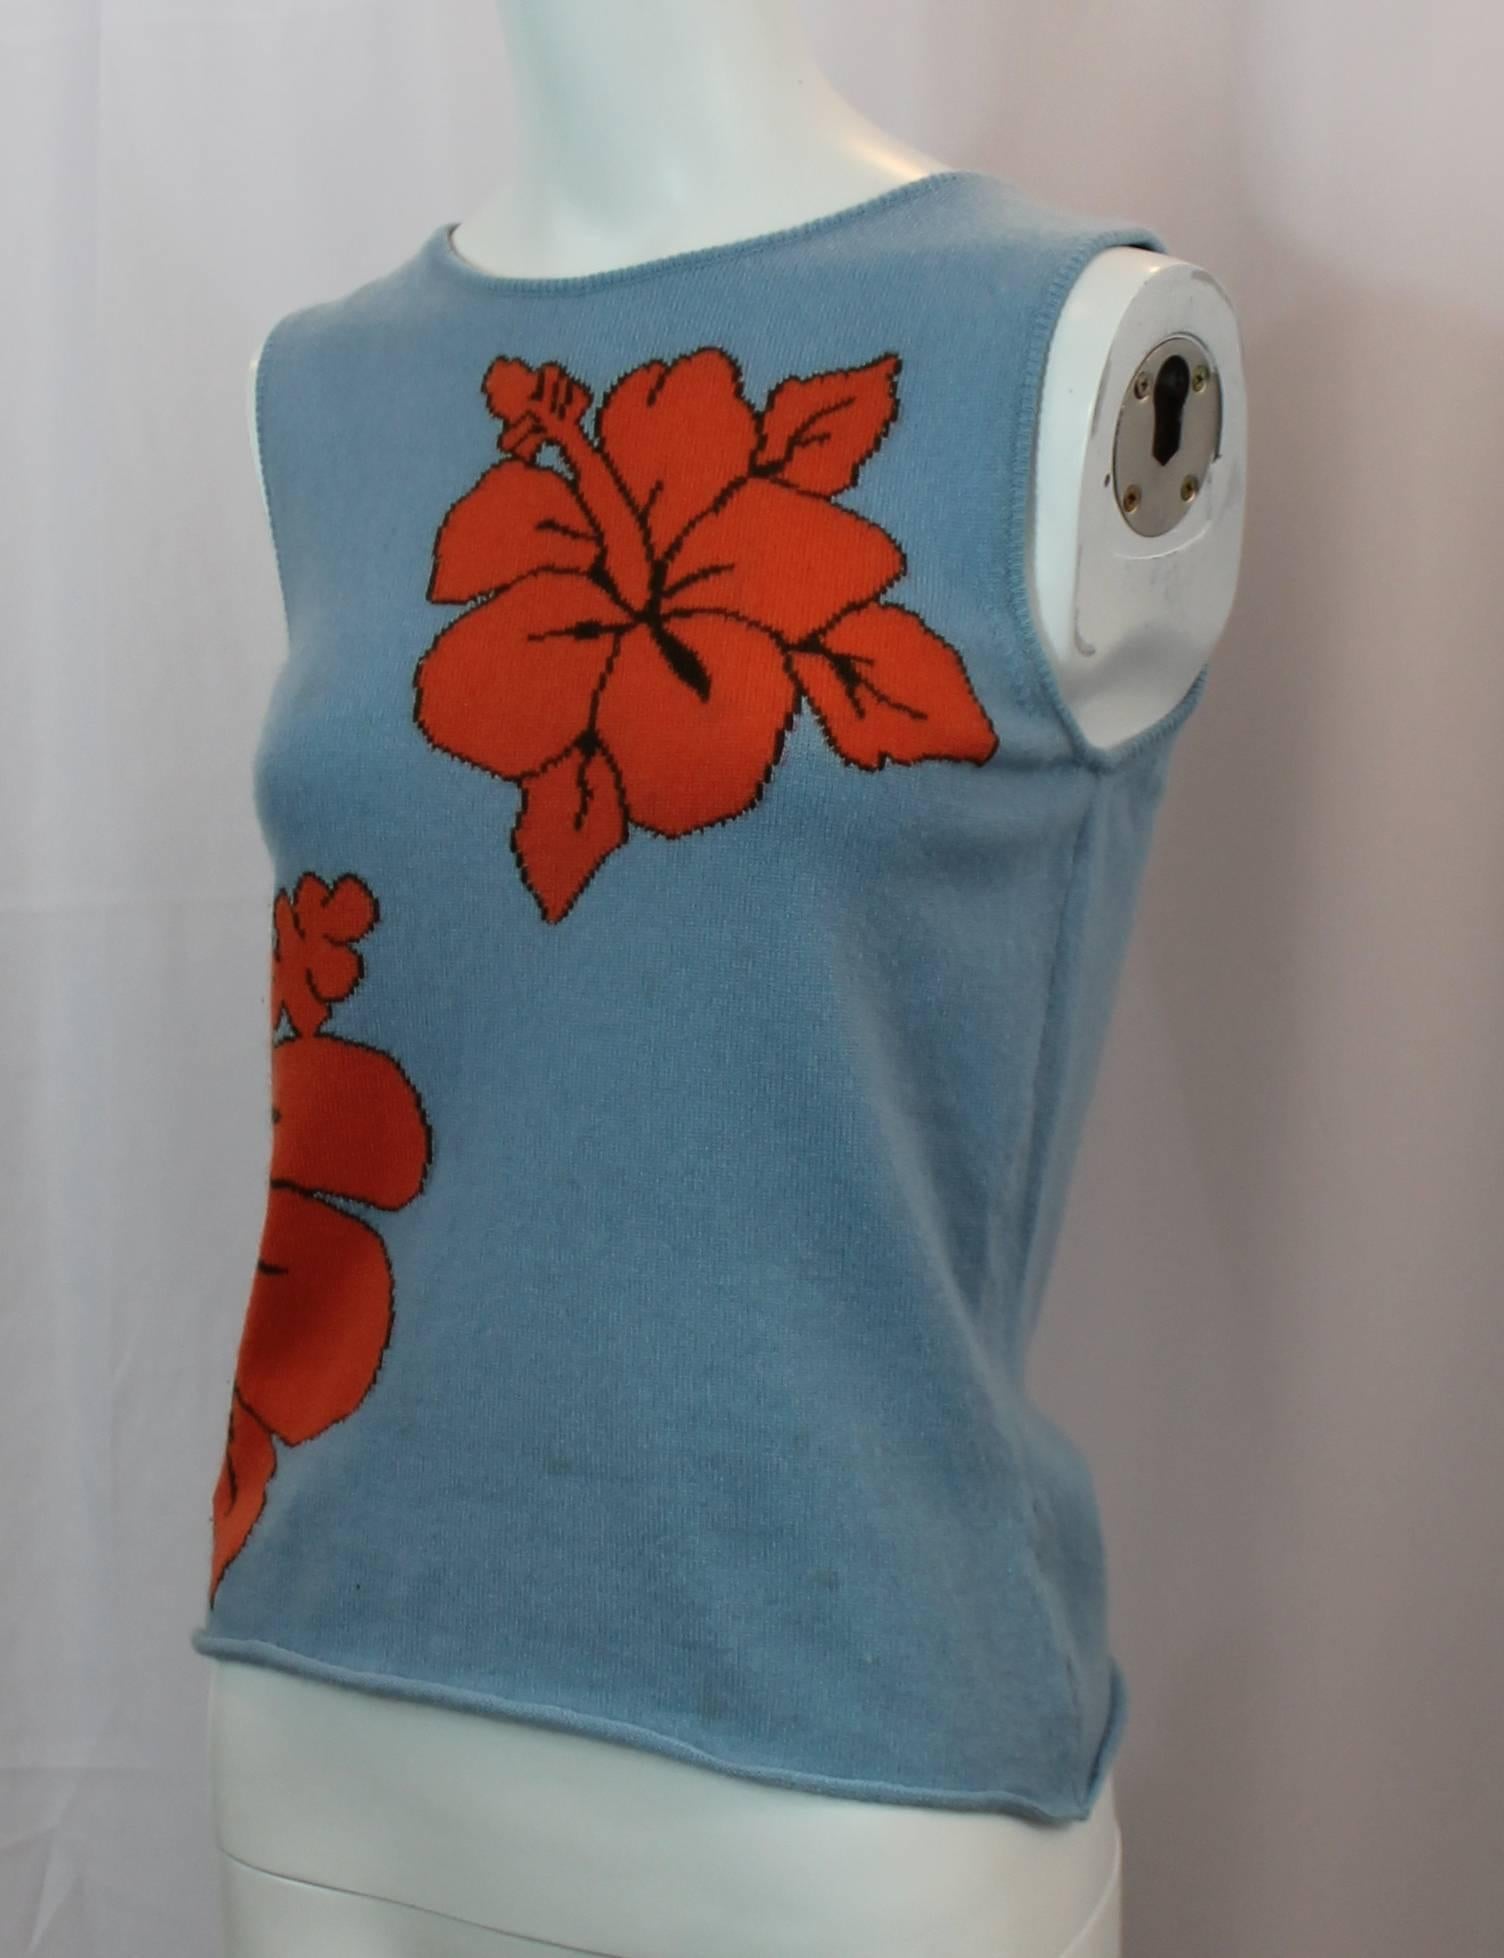 Lucien Pellat-Finet Sleeveless Blue Tropical Flower Printed Cashmere Top - S. This cute cashmere top is a blue color with 2 large, orange, hibiscus flowers on the front. It is in very good condition with some general wear to the fabric and a very